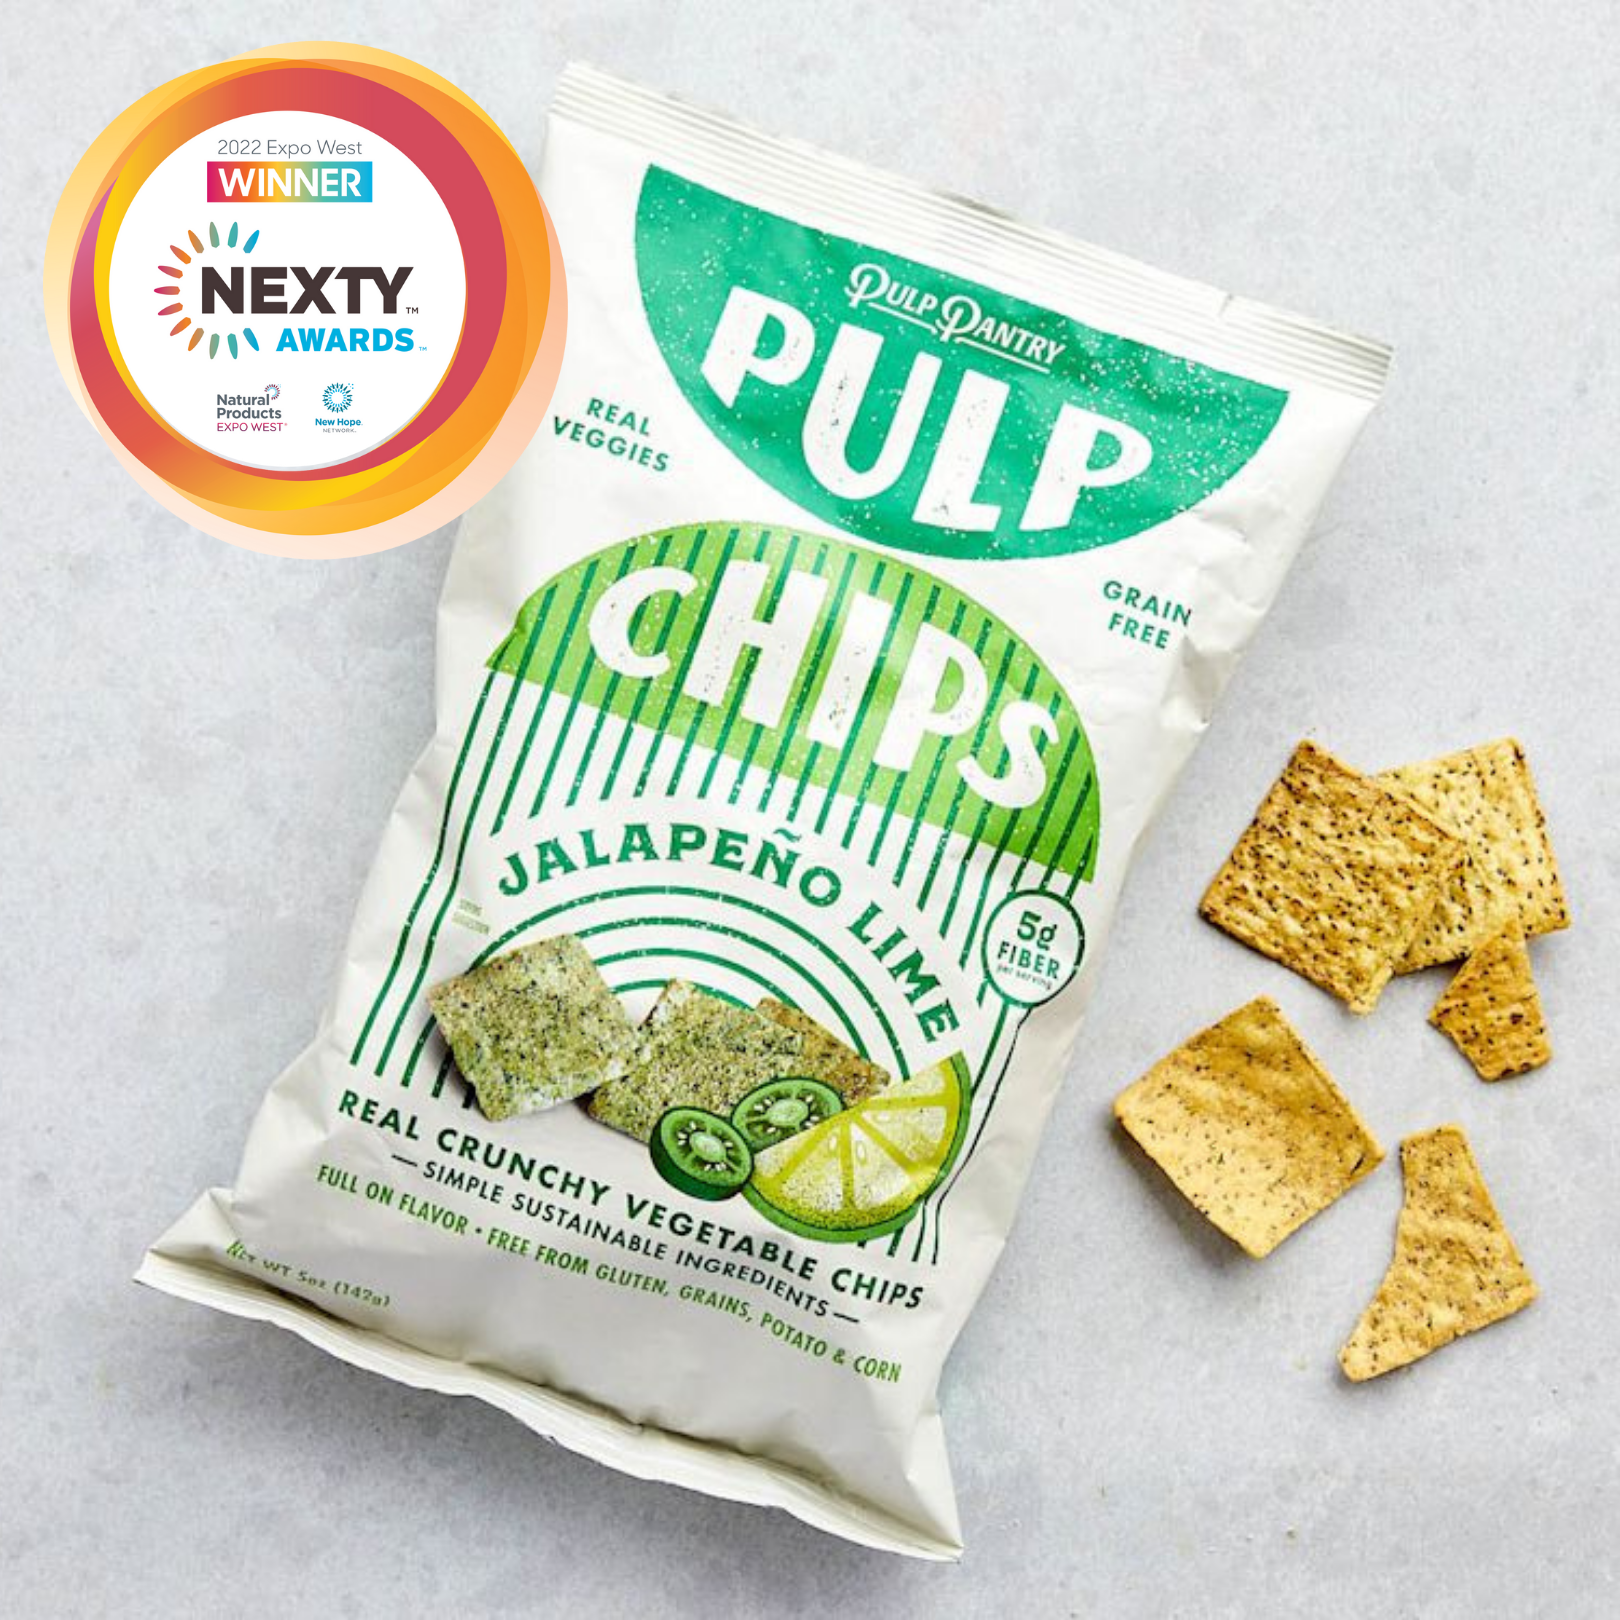 Pulp Pantry wins the NEXTY for Best Salty Snack 2022